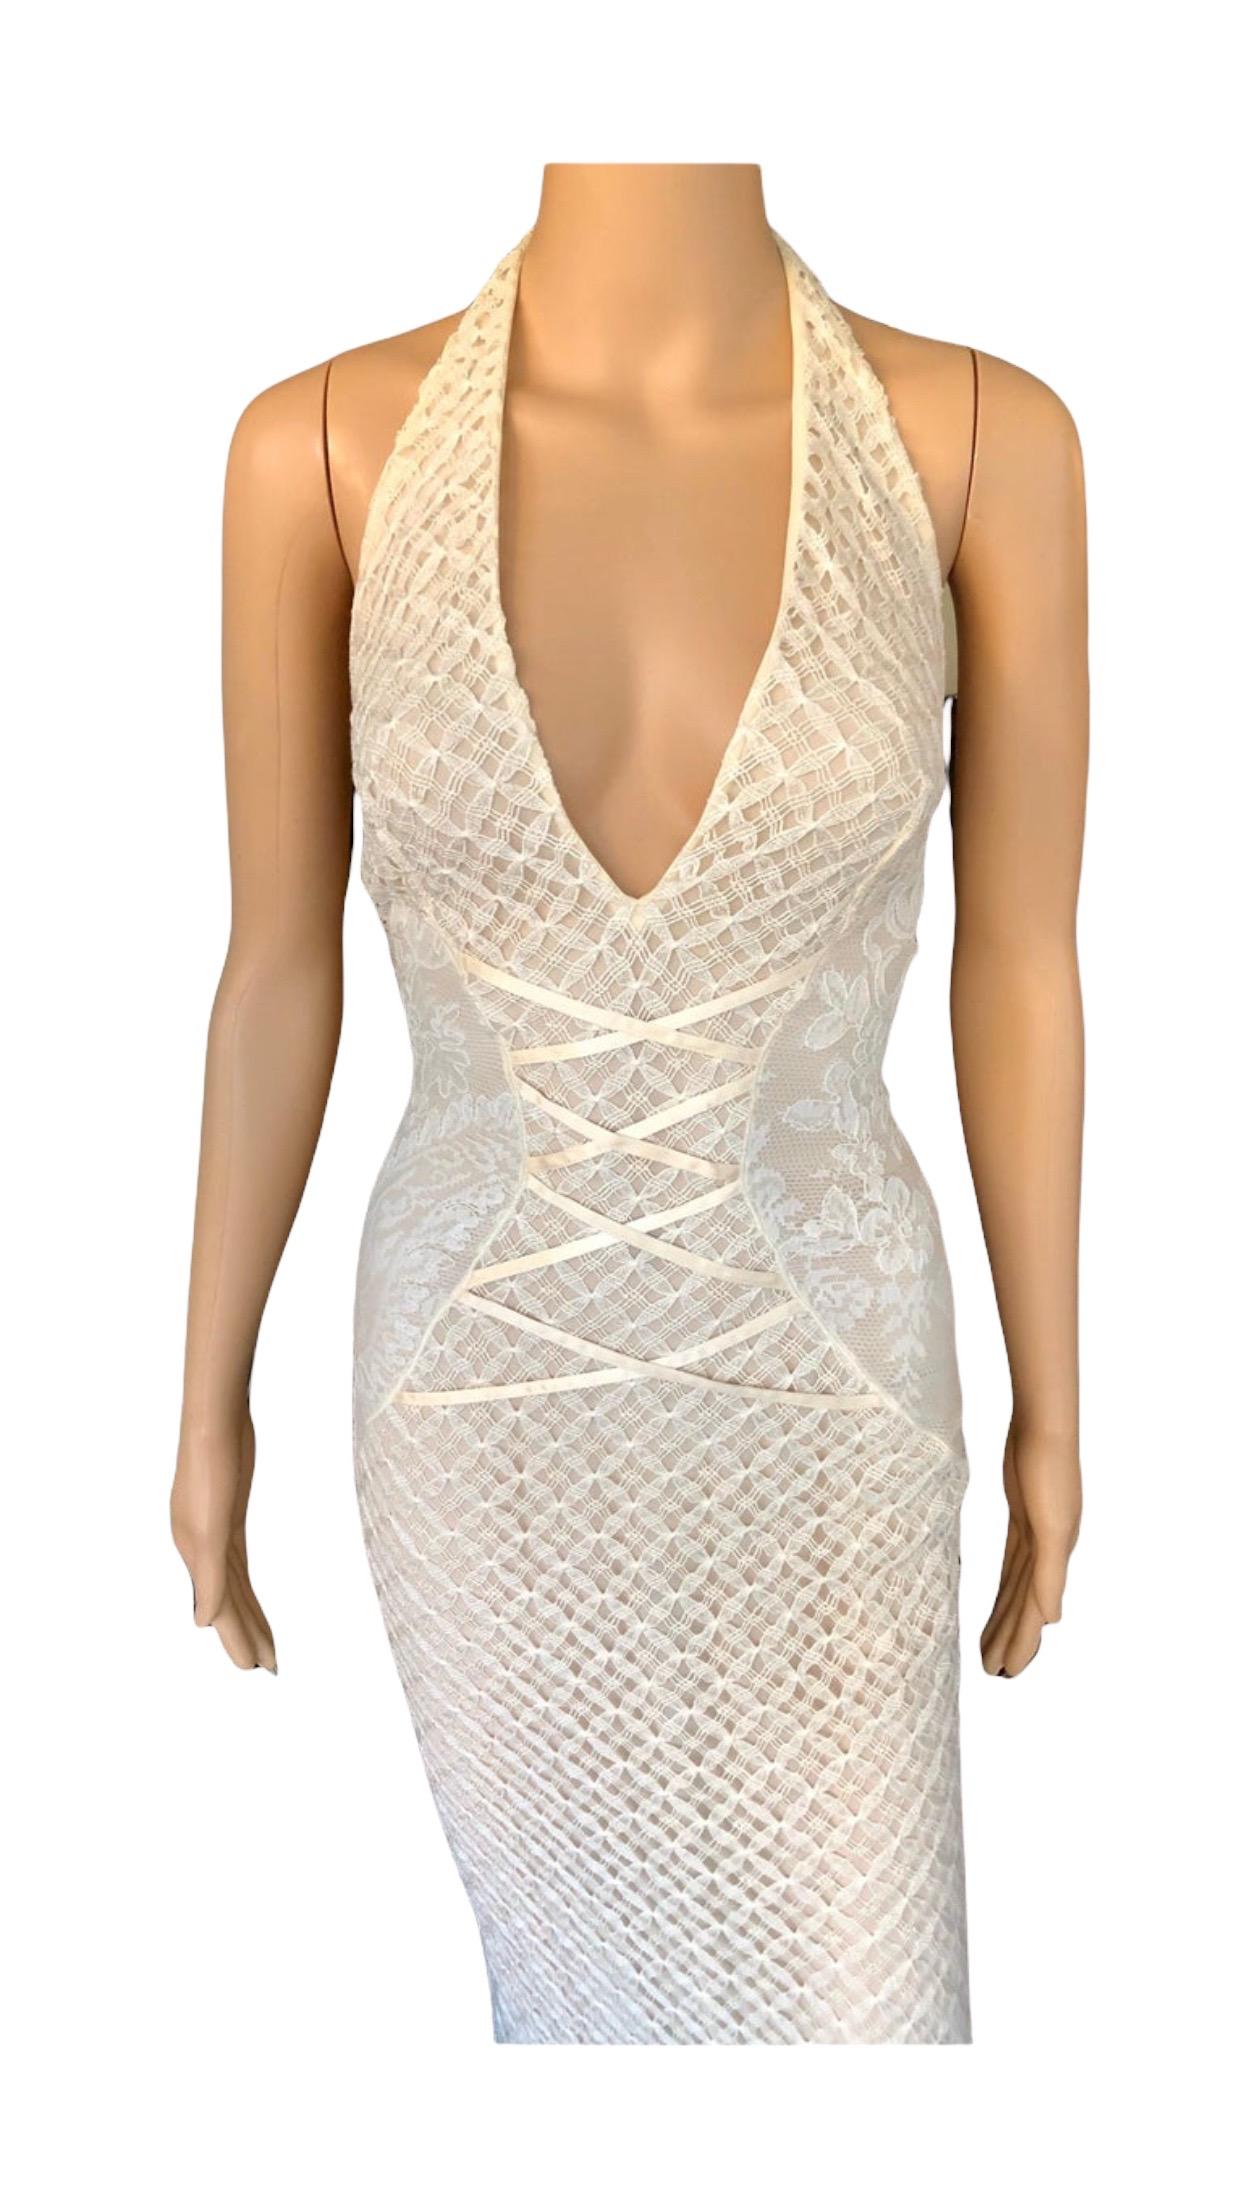 NWT Gianni Versace S/S 2002 Plunging Backless Semi Sheer Lace Ivory Dress Gown 5